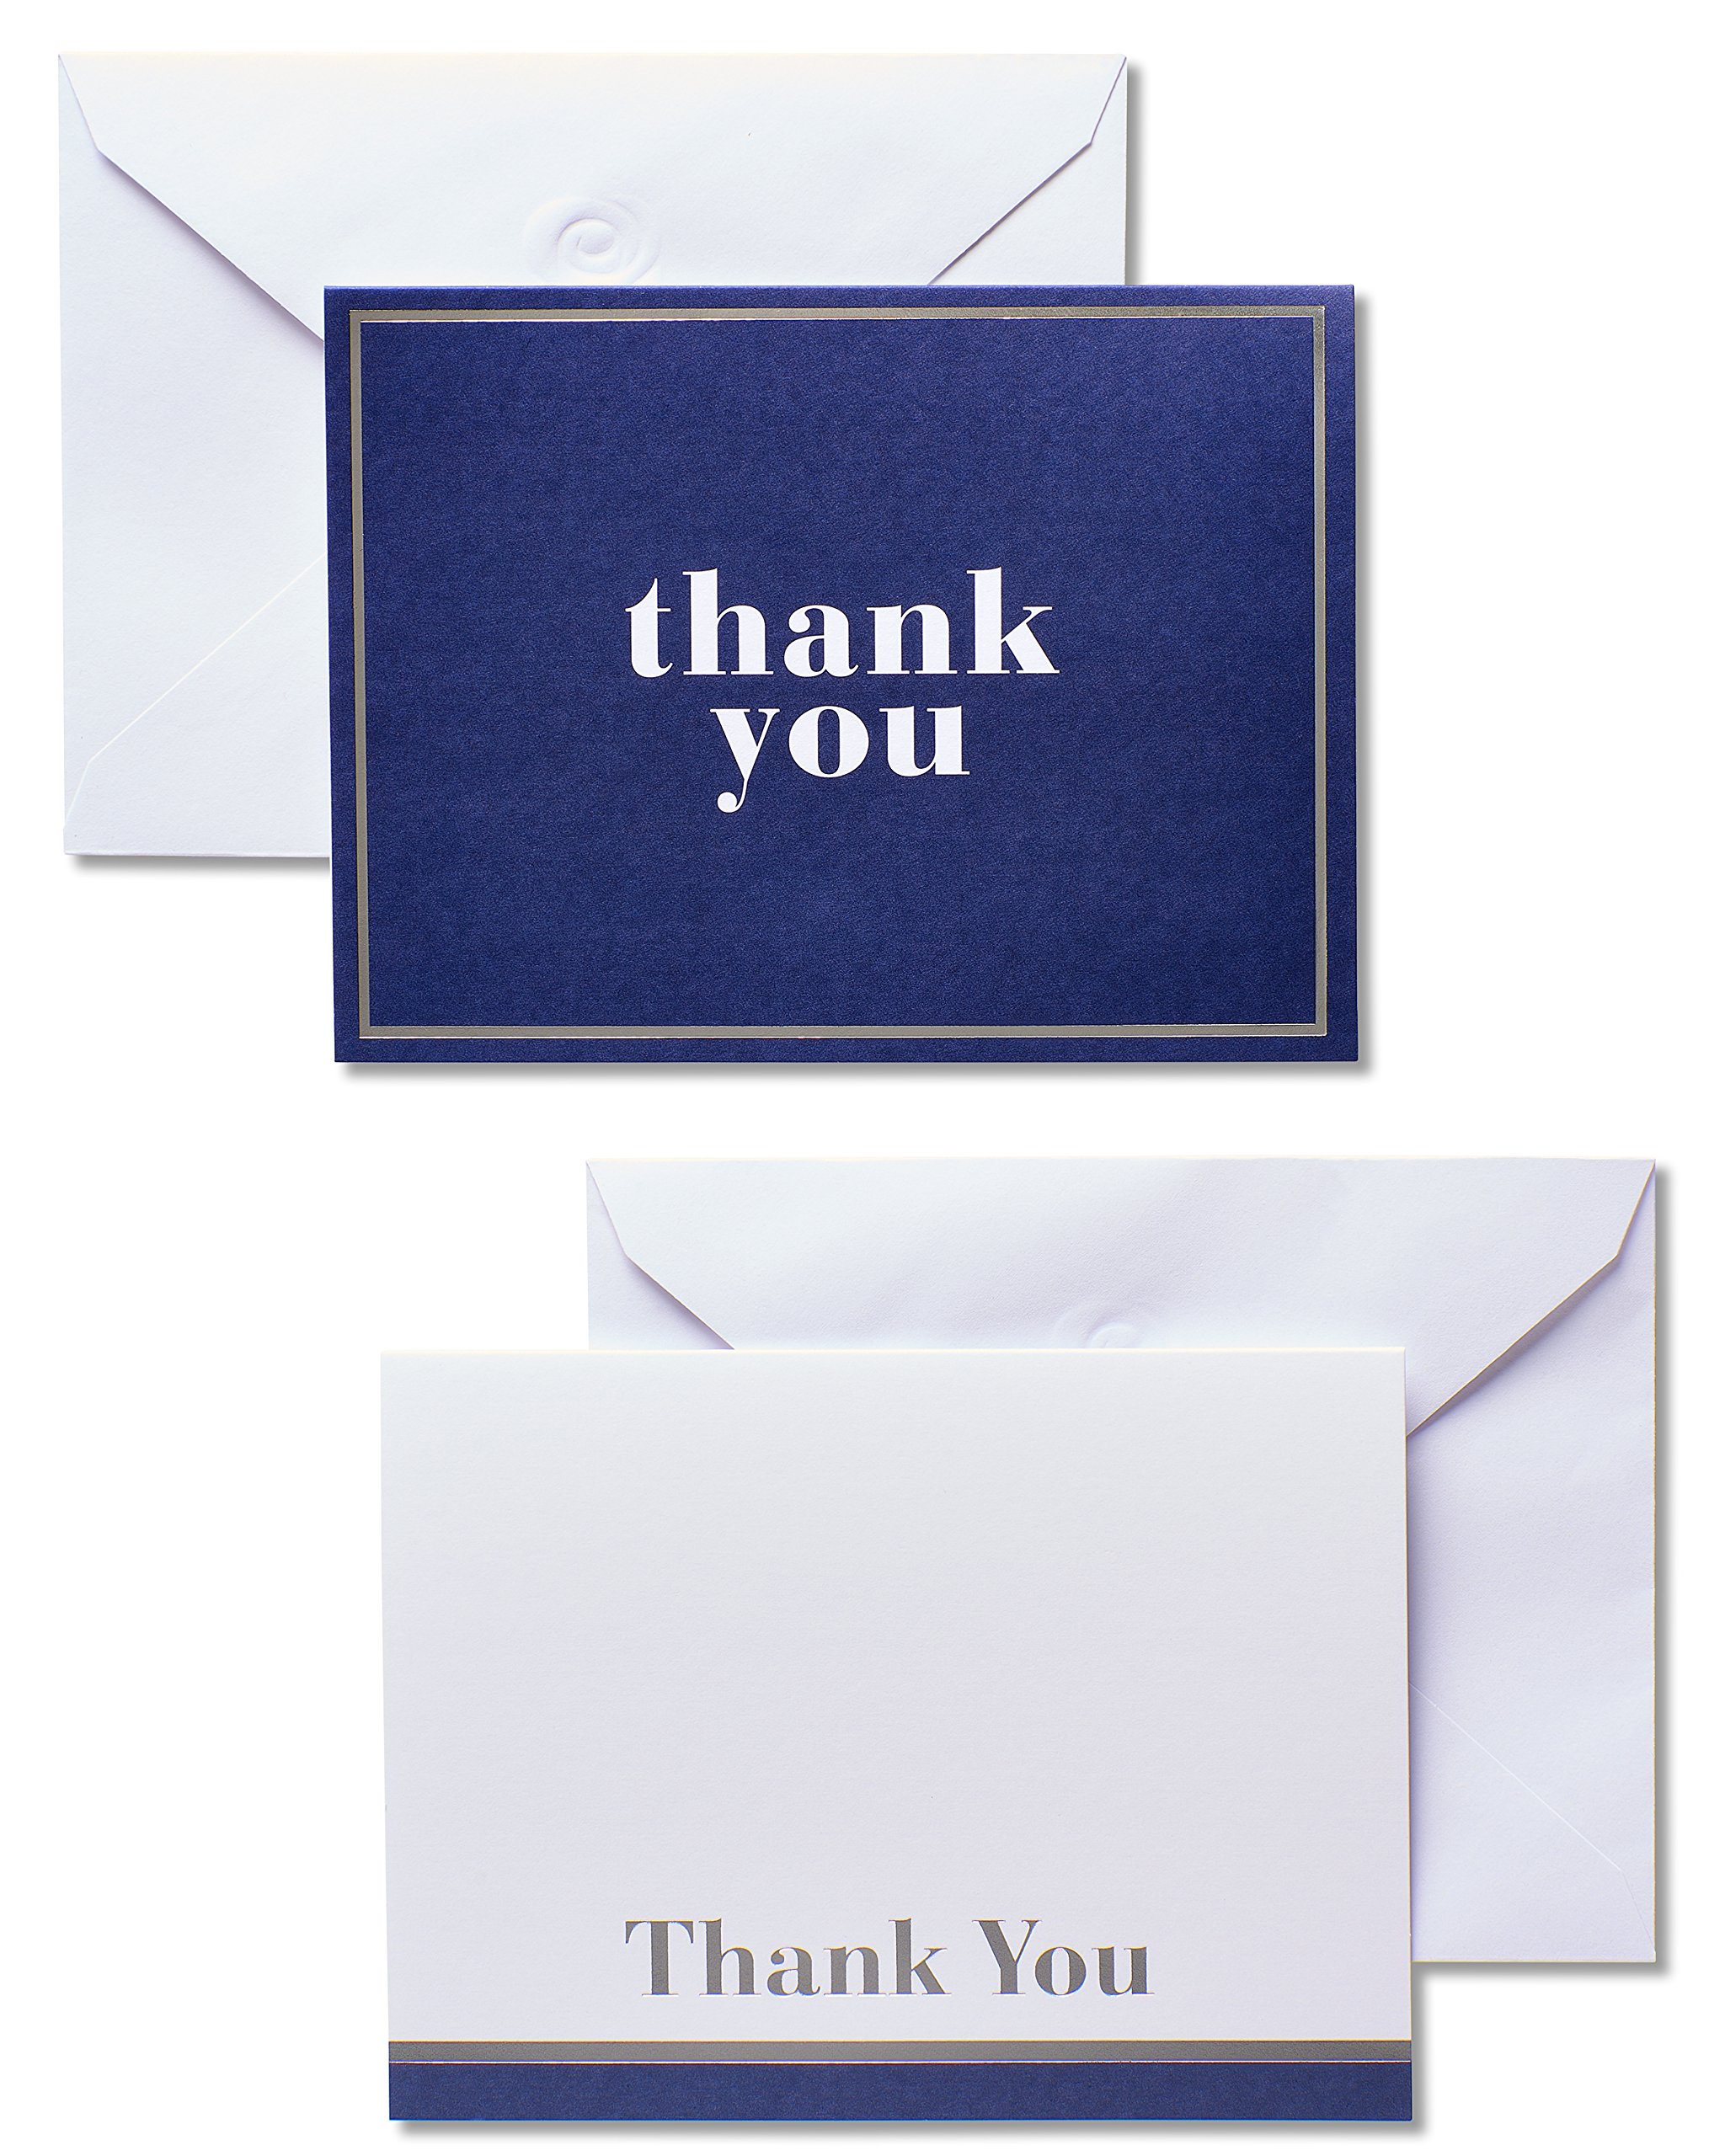 American Greetings Thank You Cards with Envelopes, Blue and White (50-Count)